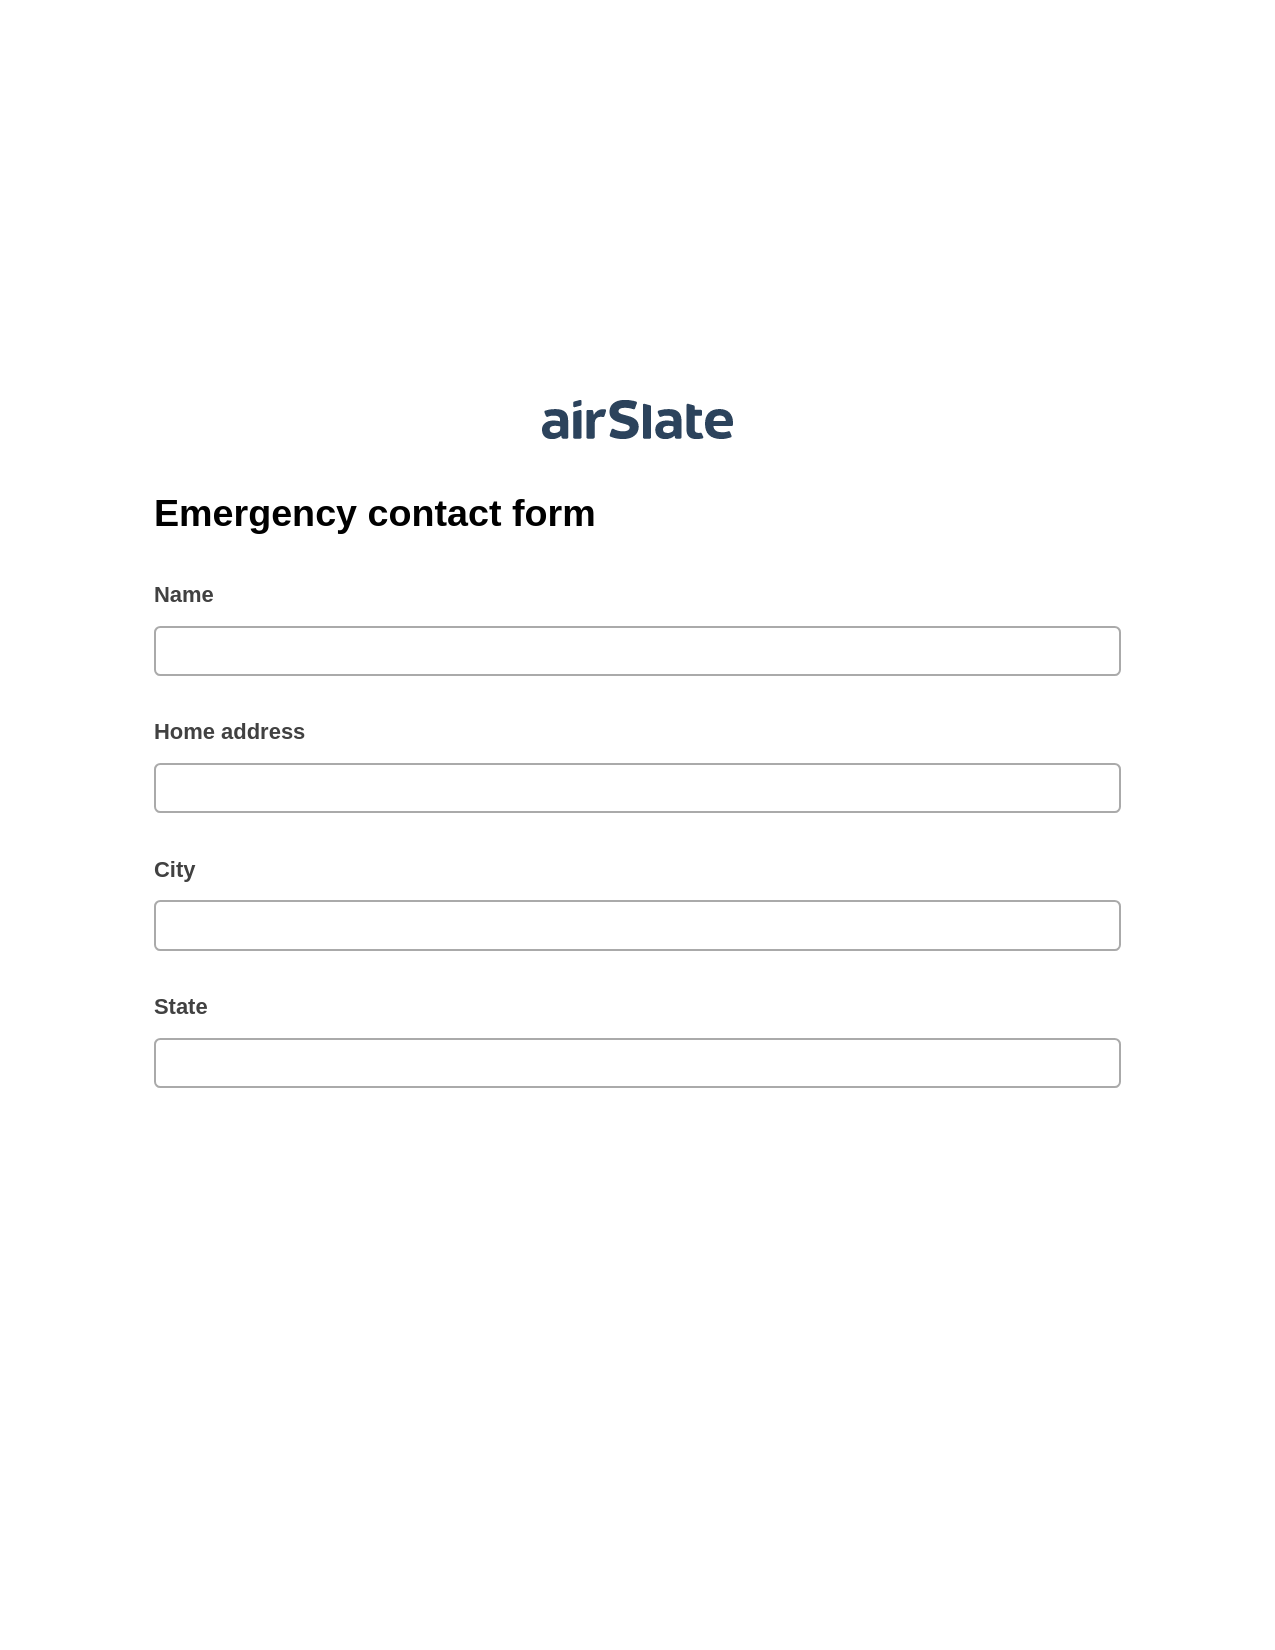 Multirole Emergency contact form Pre-fill Slate from MS Dynamics 365 Records Bot, Open as Role Bot, Export to Formstack Documents Bot